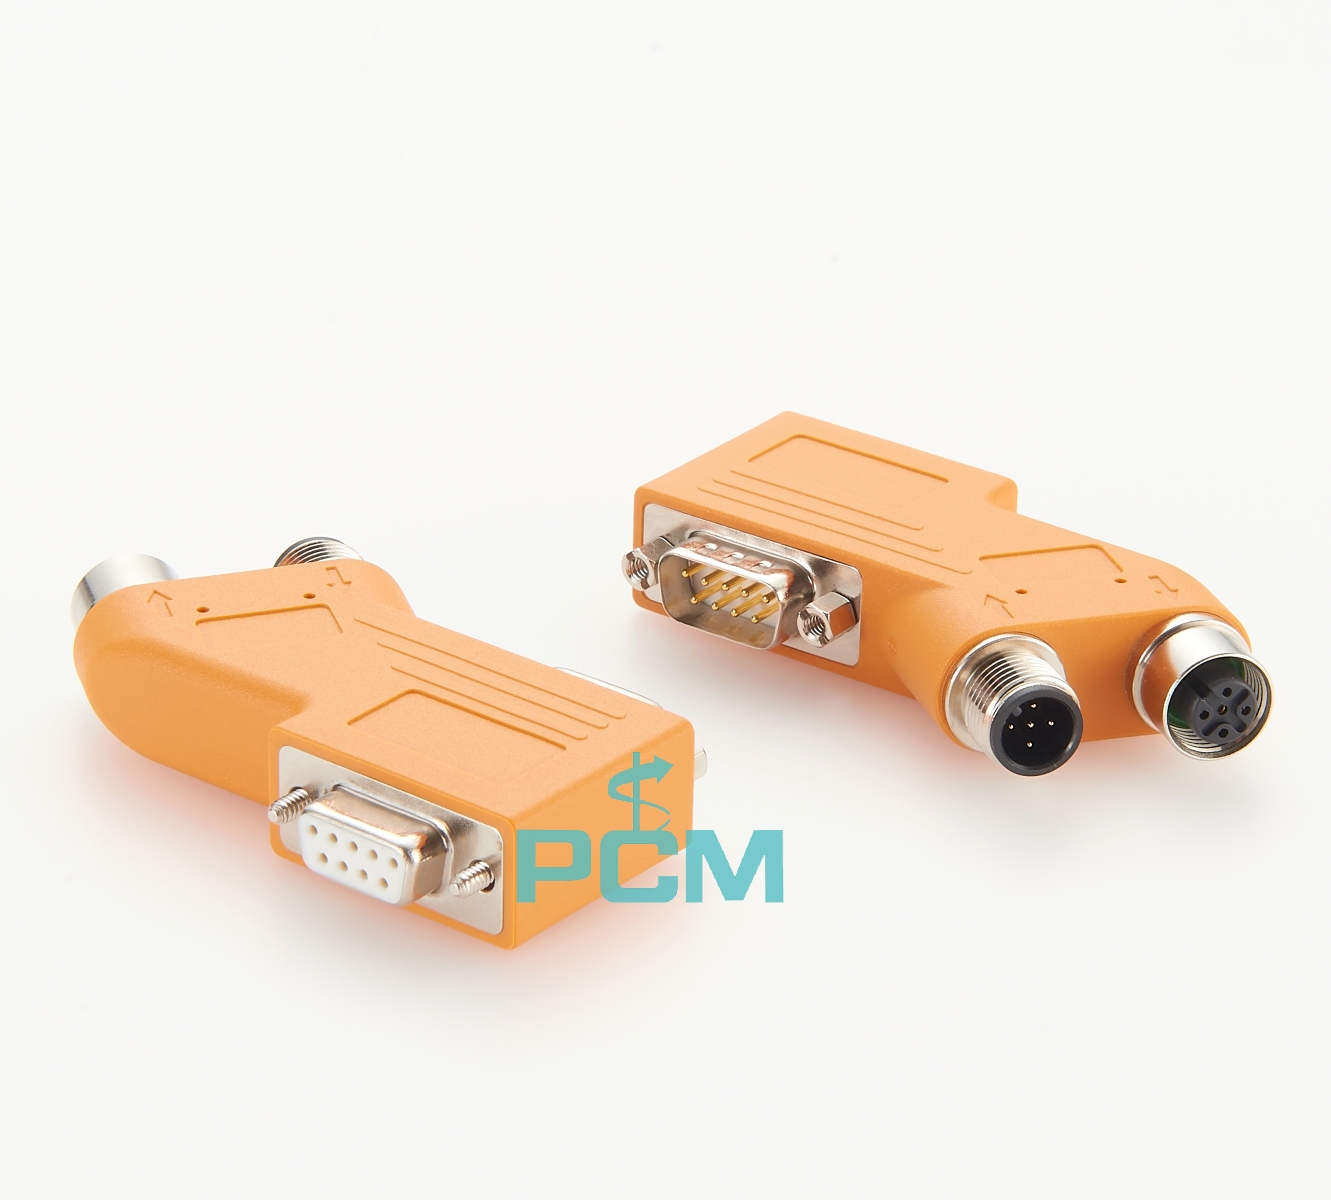 CANopen female SUB-D9 connector 35 degree angled